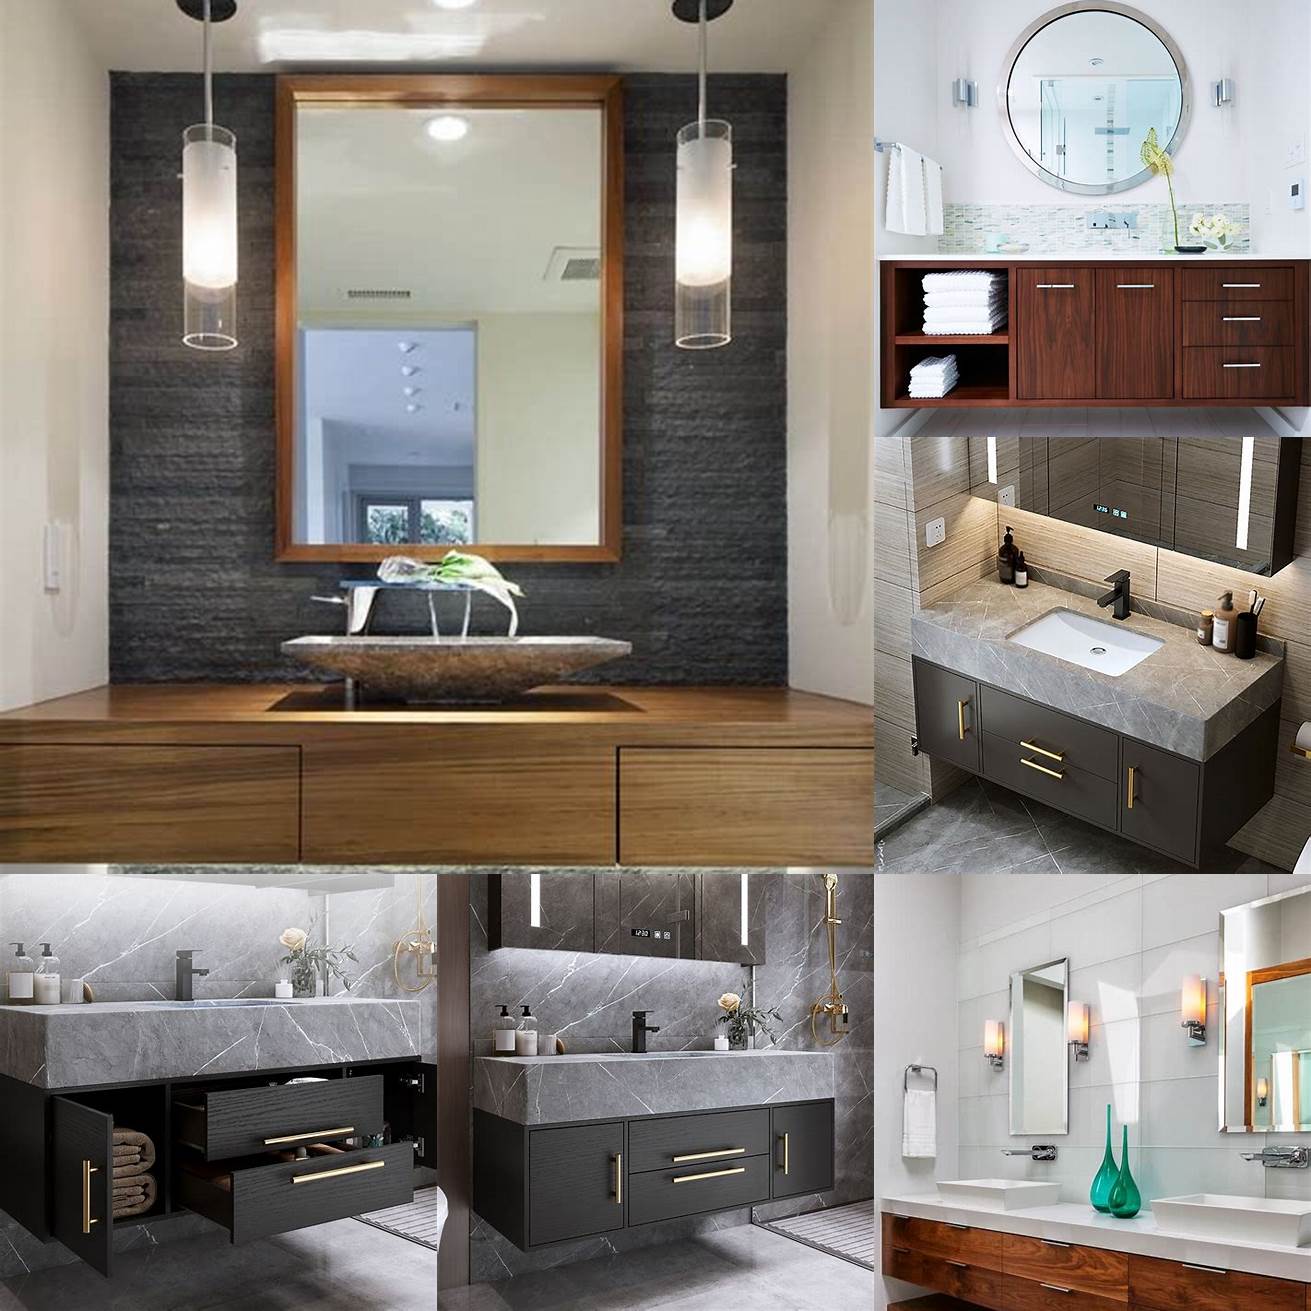 Modern design Wall mounted vanities have a sleek and modern look that can give your bathroom a fresh and updated appearance